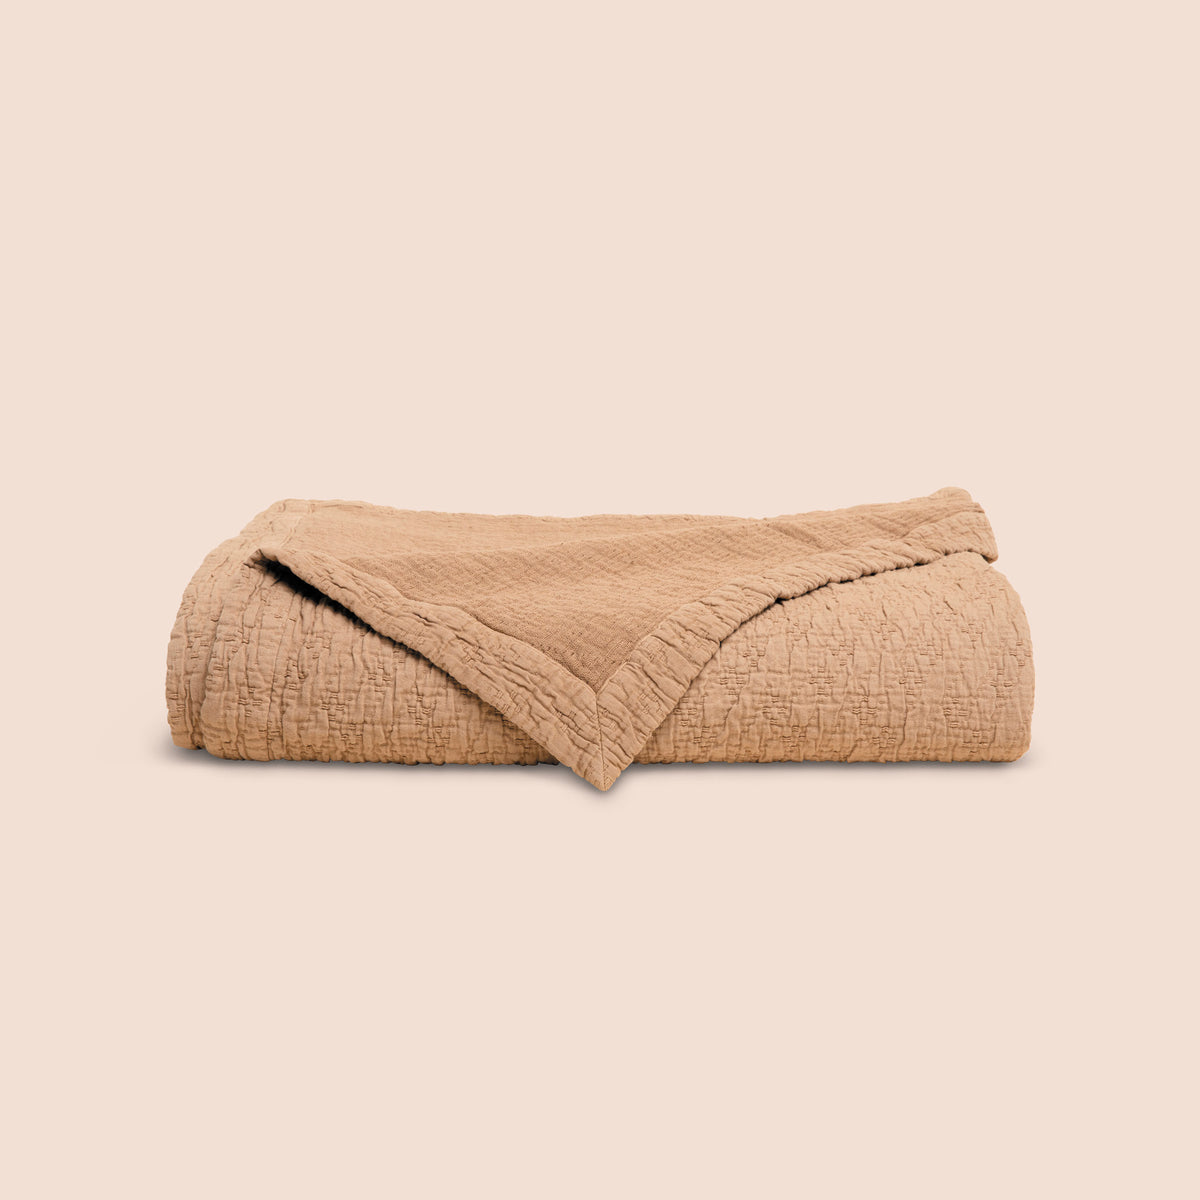 Image of the Ochre Wave Coverlet neatly folded with the back right corner folded forward on a light pink background